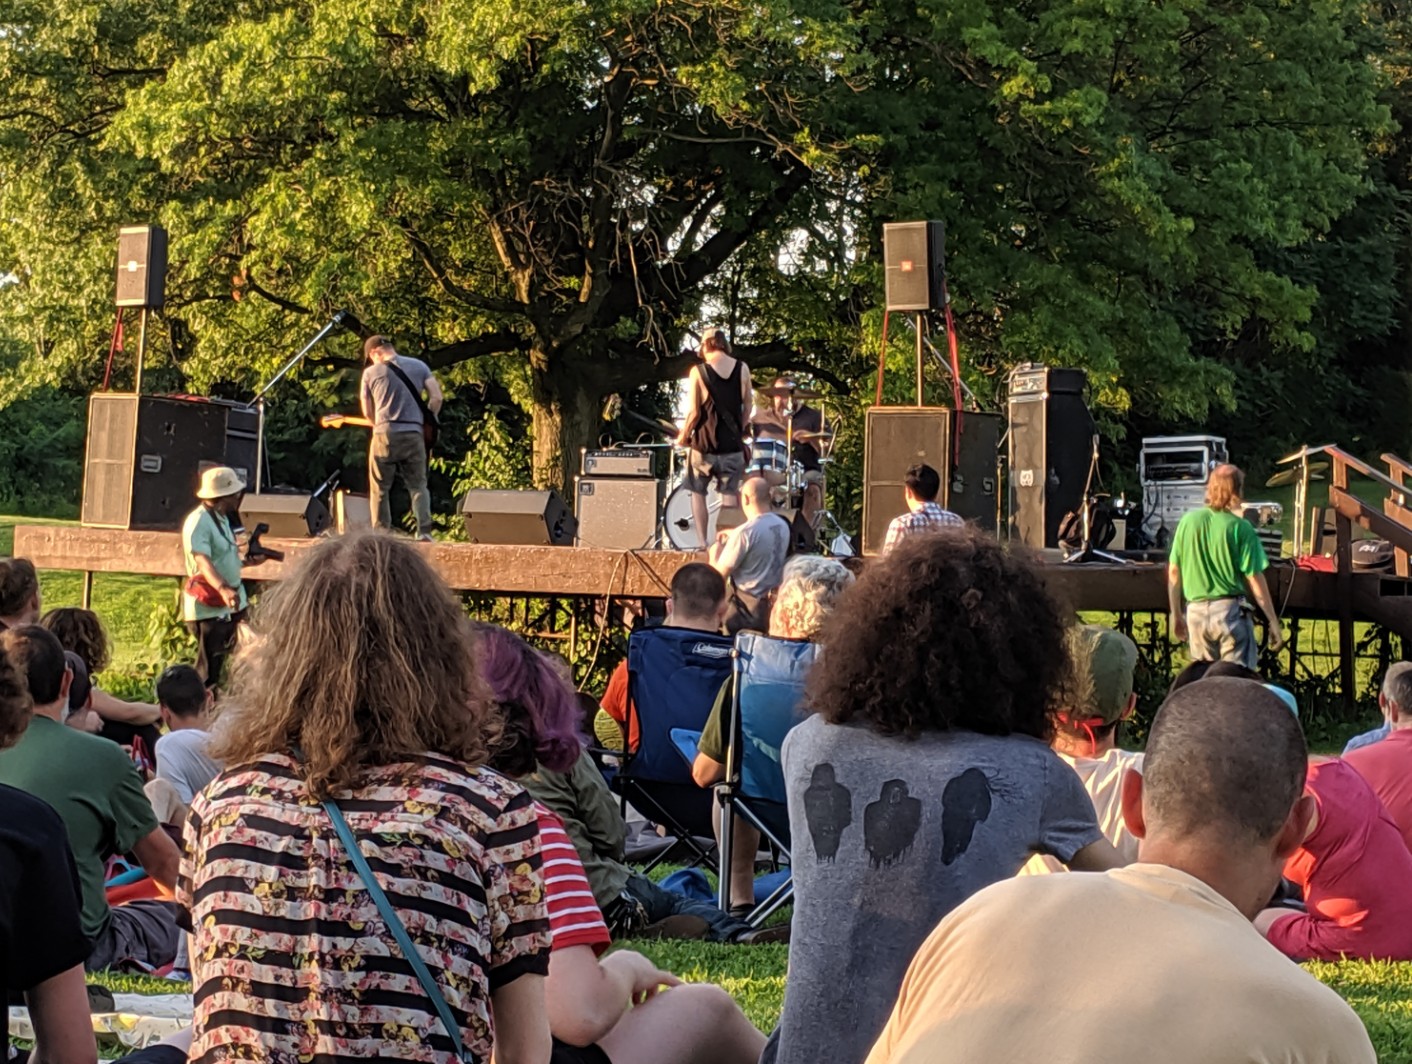 A show at Fort Reno in Washington, D.C.